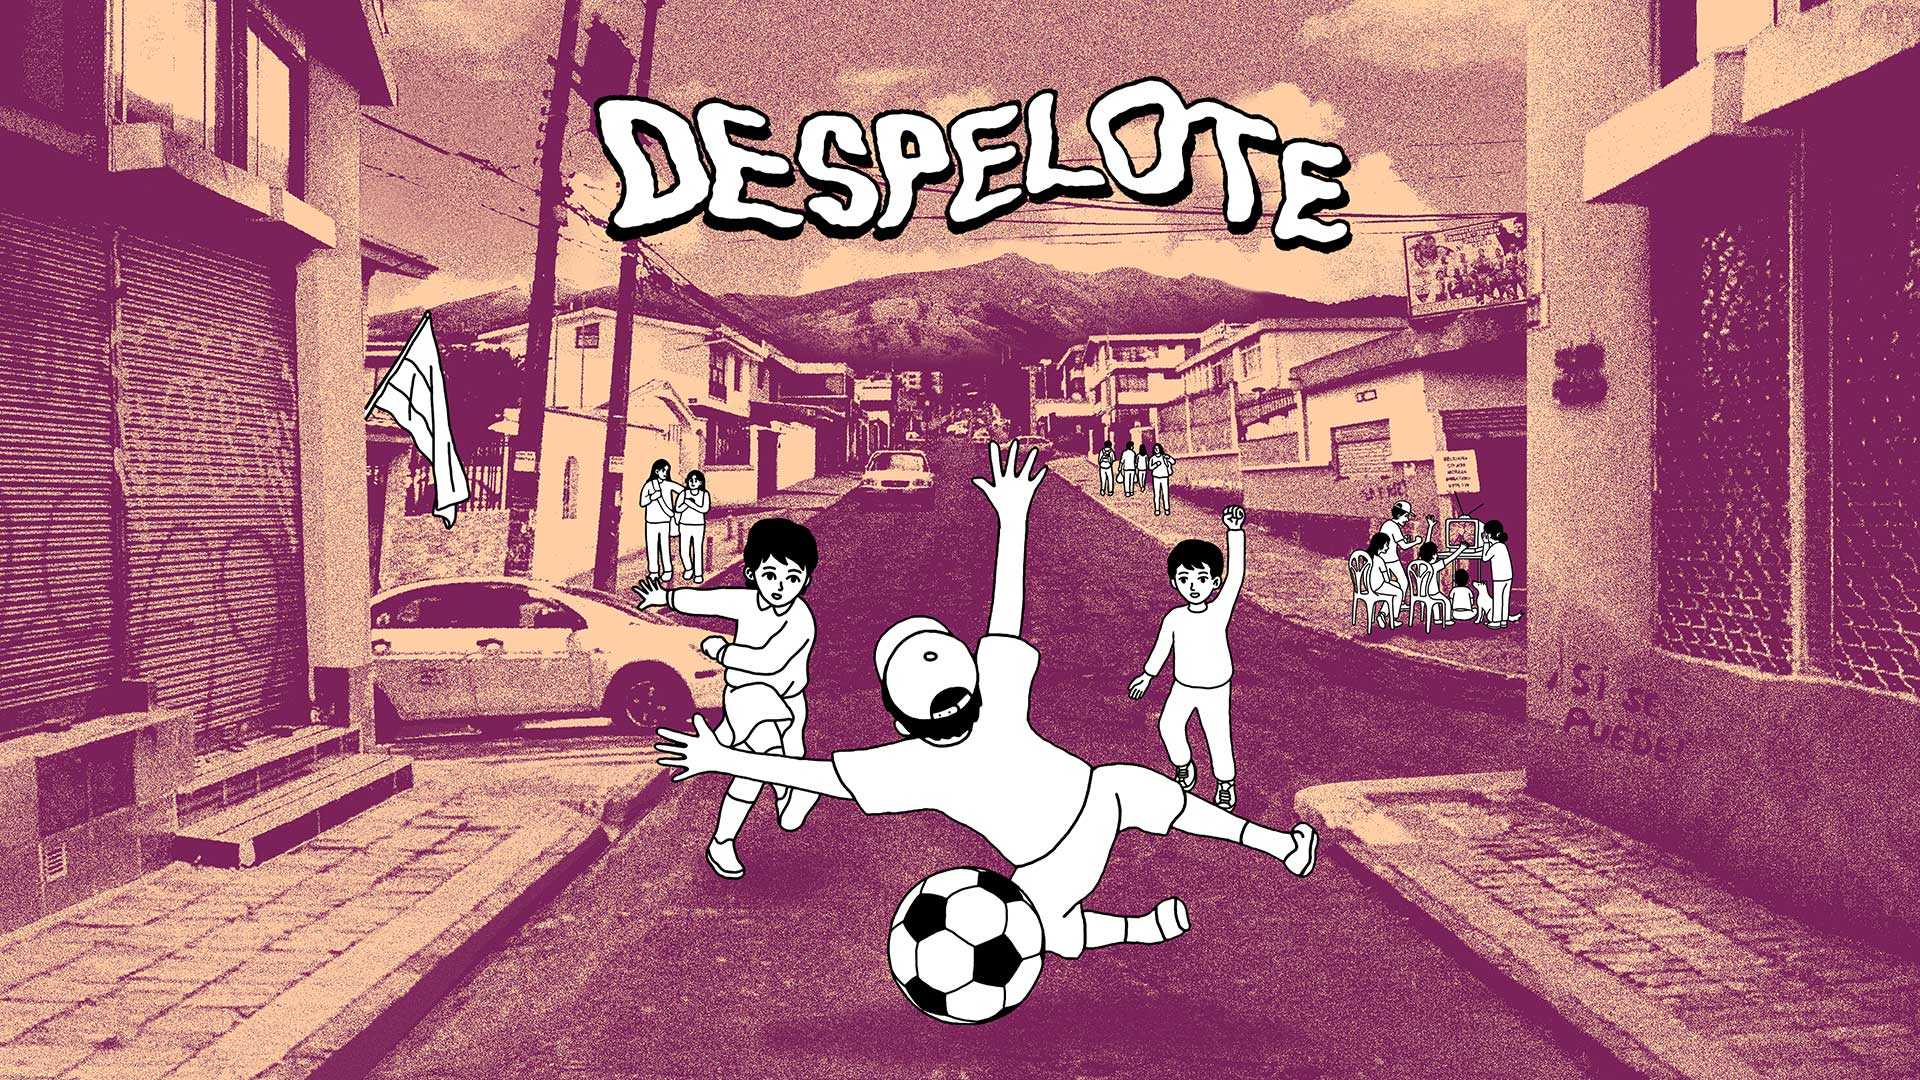 Play Soccer While you Explore a Community in Despelote